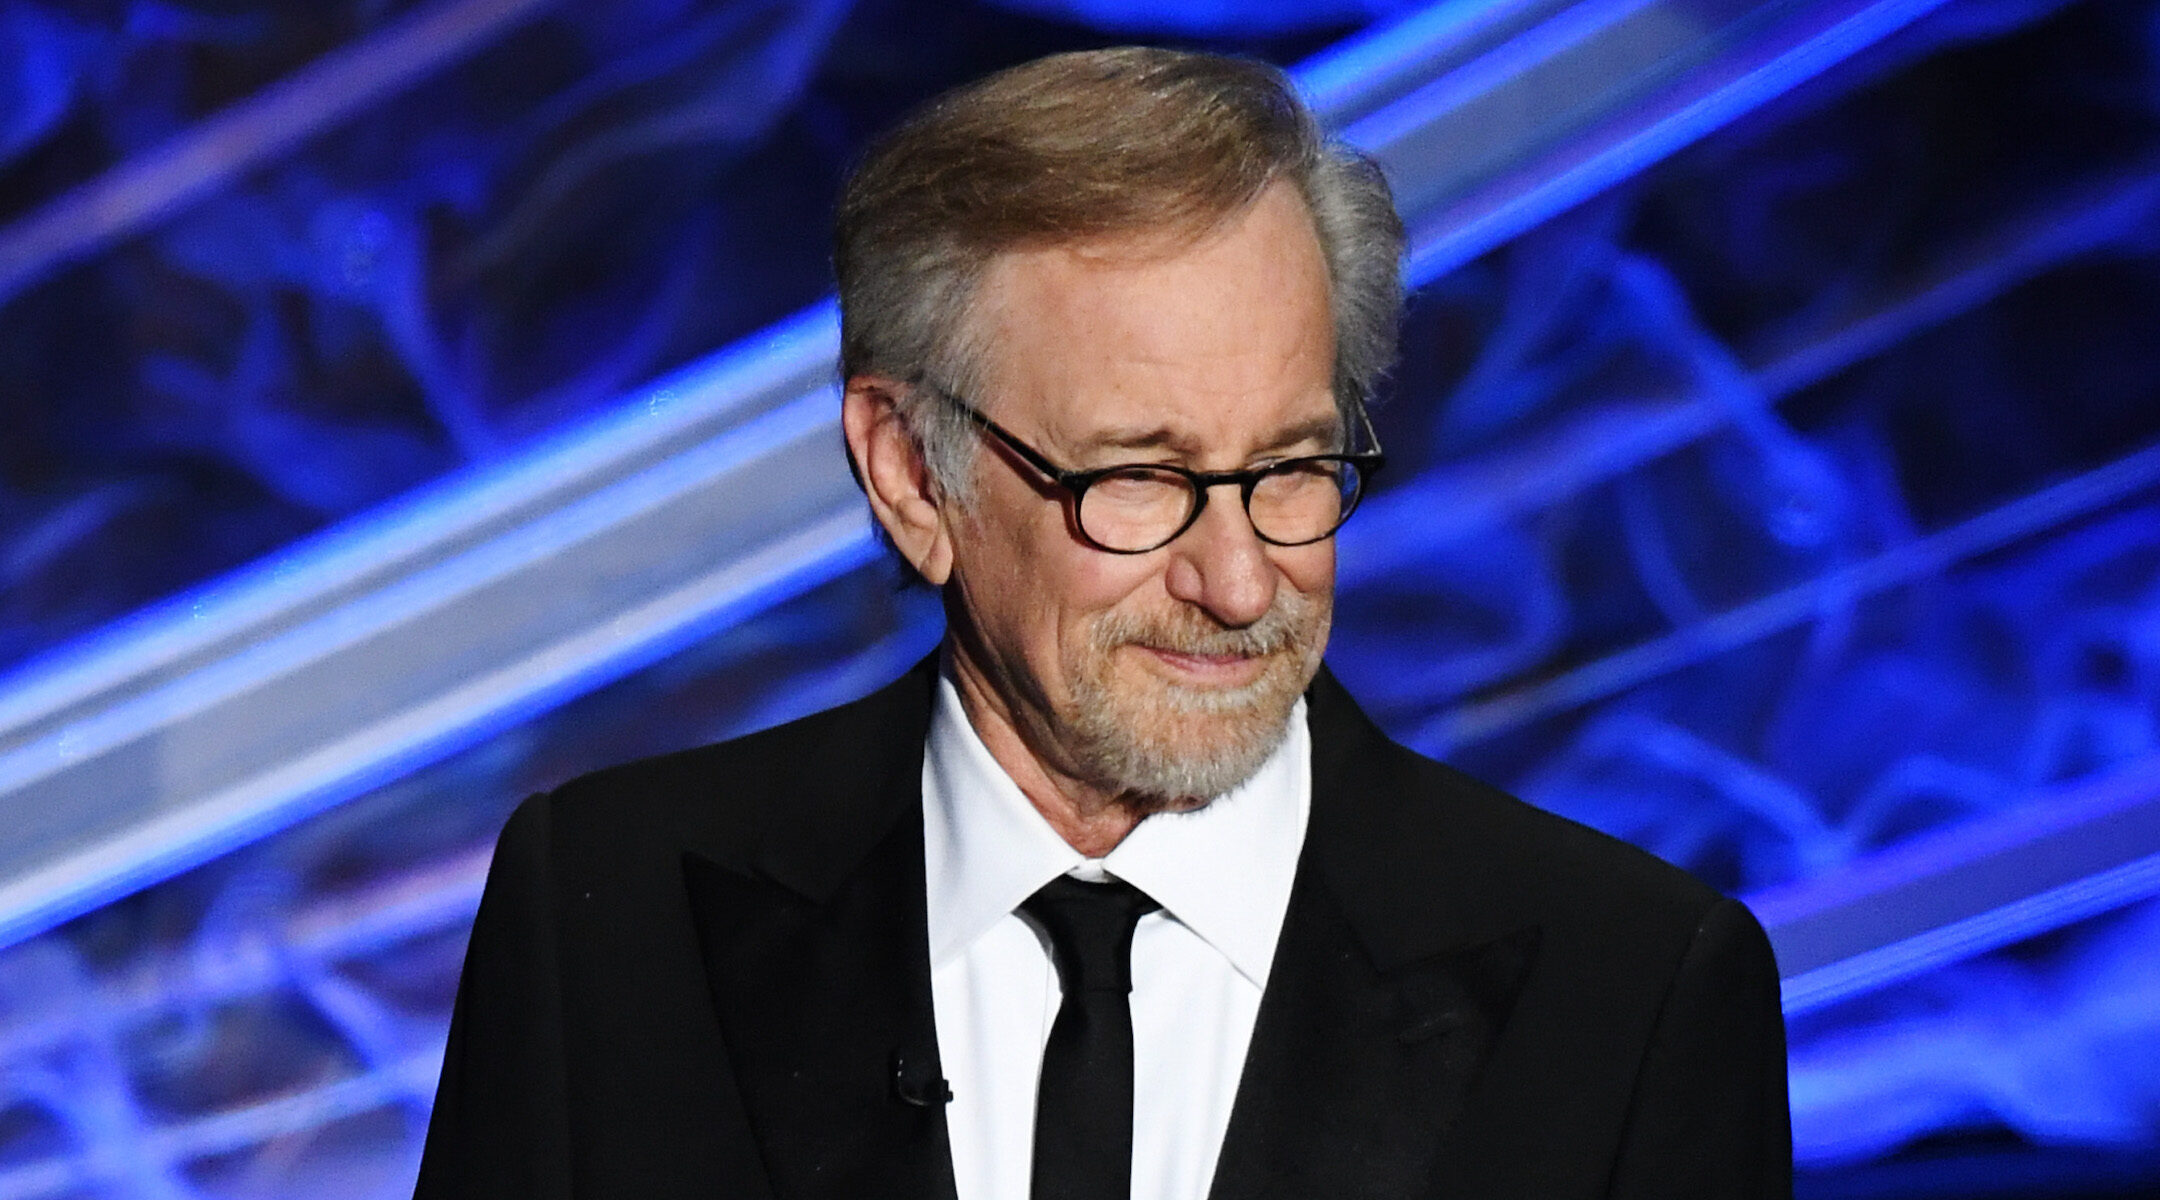 Steven Spielberg writing movie based on his own childhood | The Times of Israel